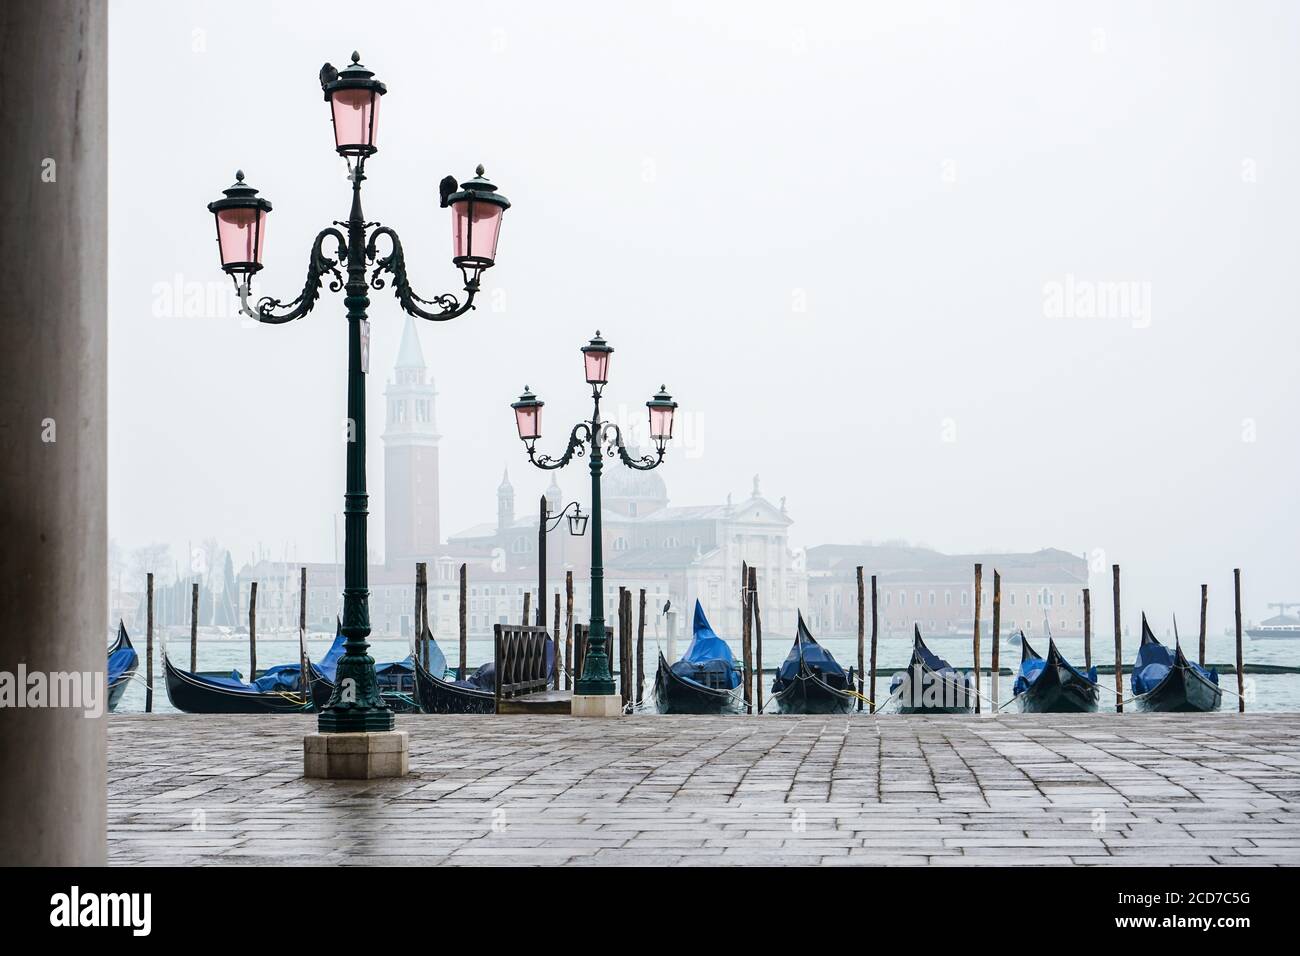 Romantic promenade in Venice with street lamps and blue gondolas docked in the grand canal, during a foggy day. Stock Photo